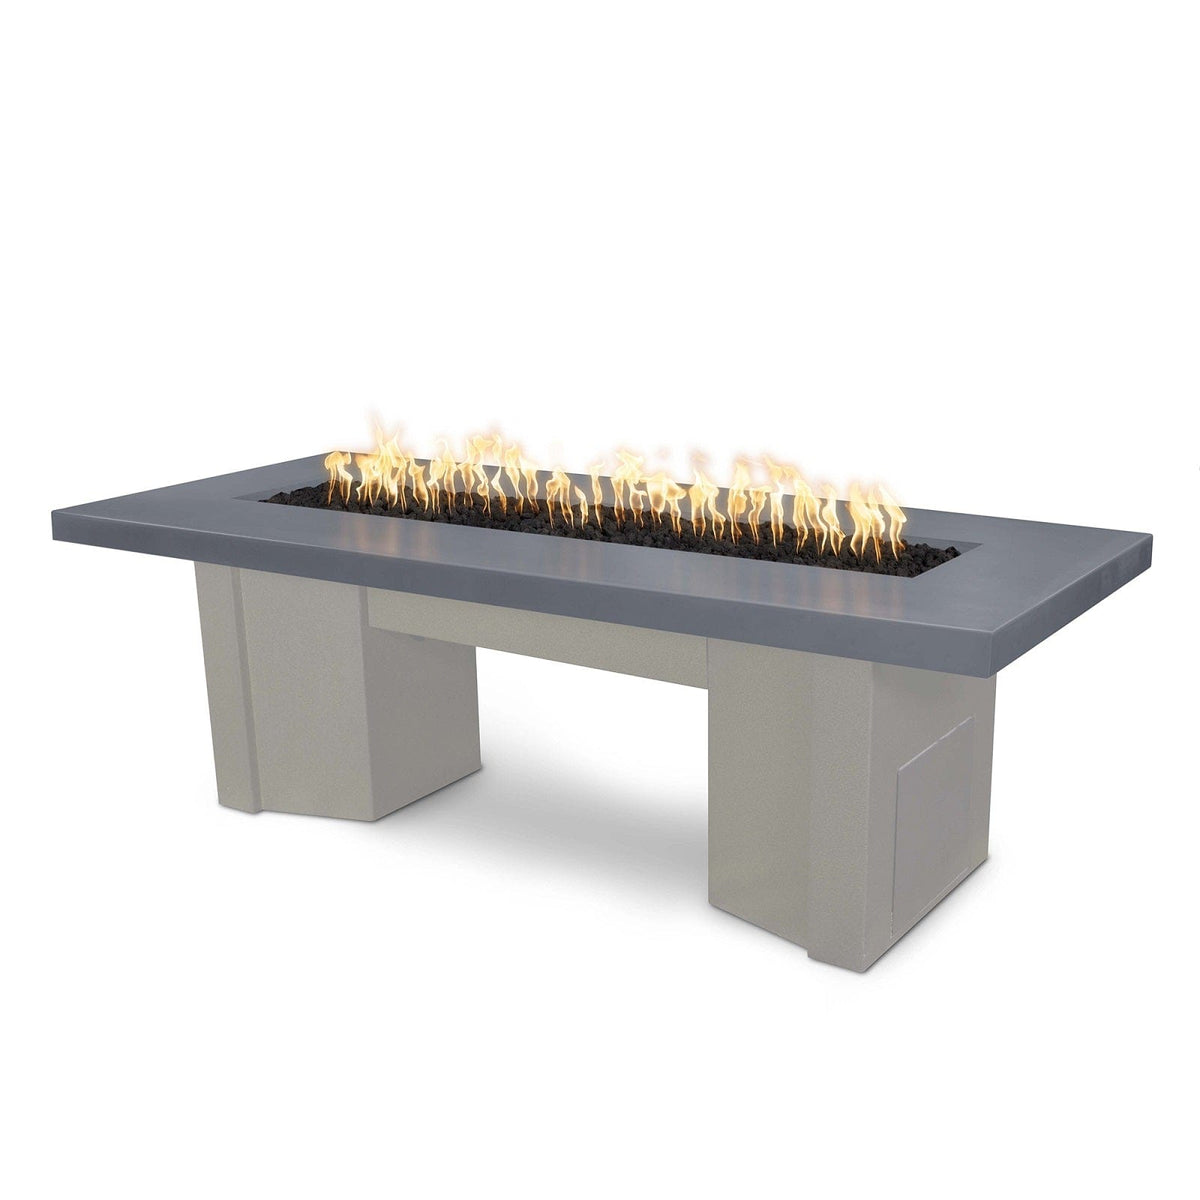 The Outdoor Plus Fire Features Gray (-GRY) / Pewter Powder Coated Steel (-PEW) The Outdoor Plus 60&quot; Alameda Fire Table Smooth Concrete in Liquid Propane - 110V Plug &amp; Play Electronic Ignition / OPT-ALMGFRC60EKIT-LP